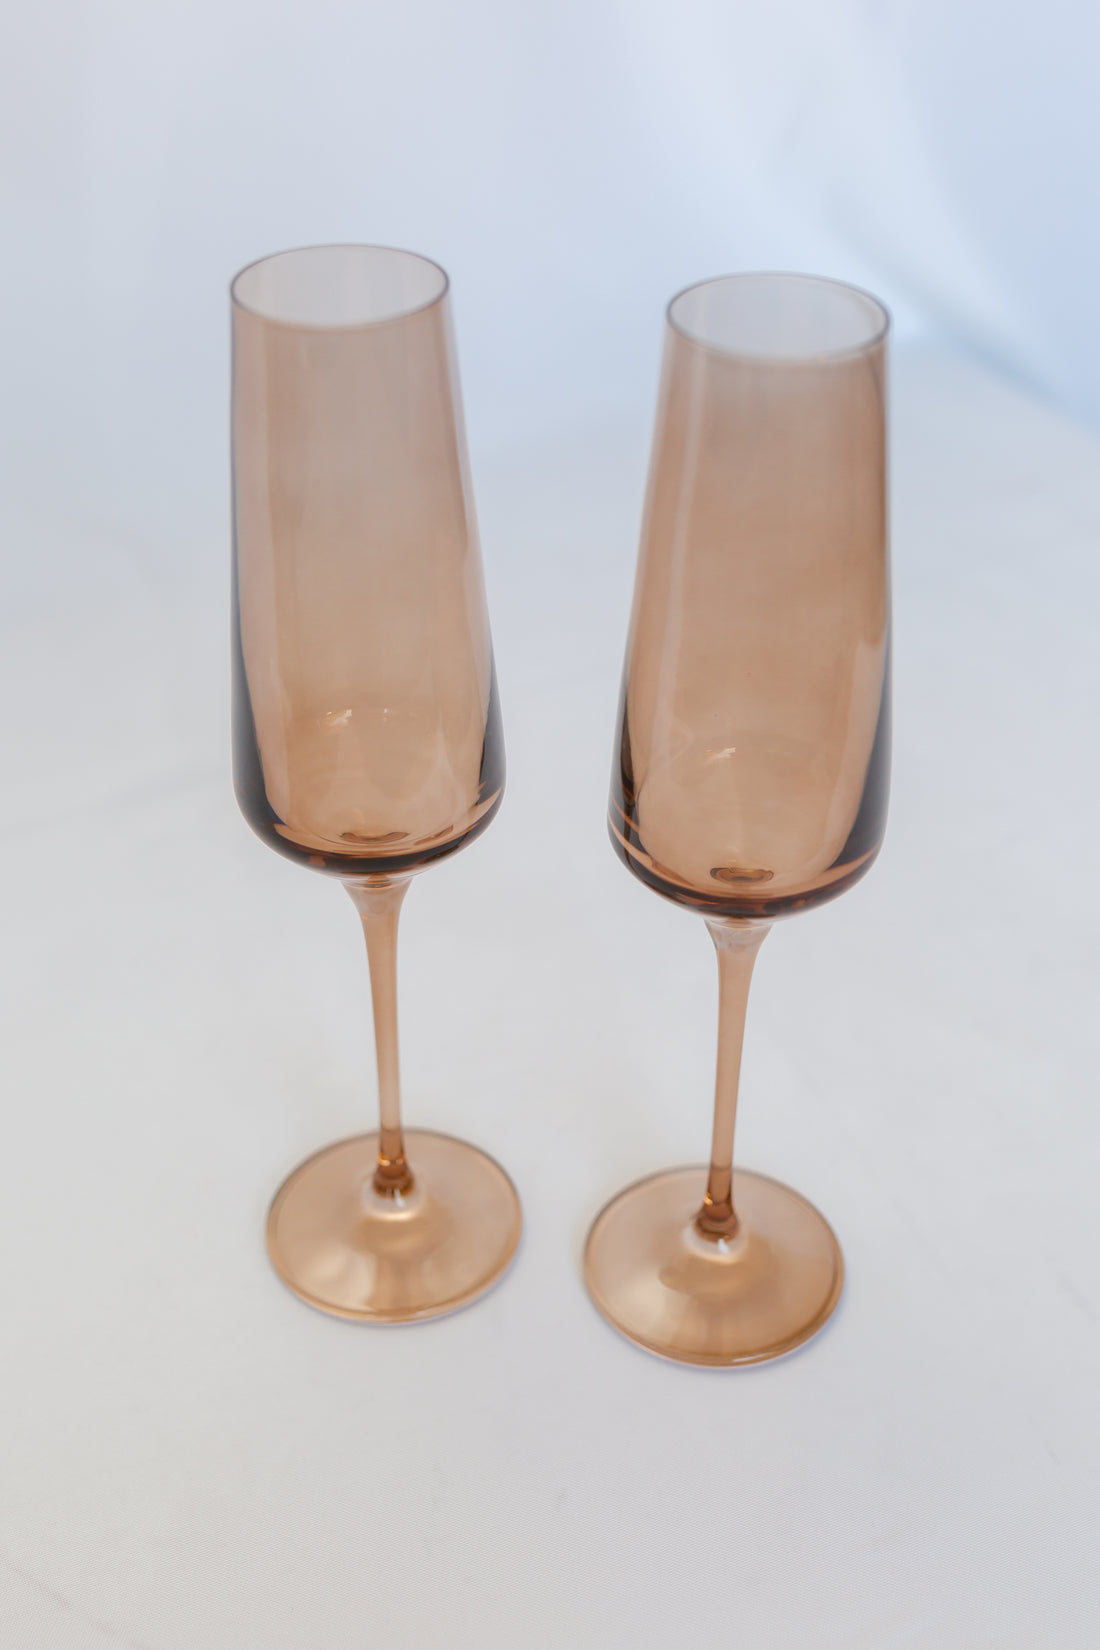 Estelle Colored Champagne Flute - Set of 2 {Amber Smoke}